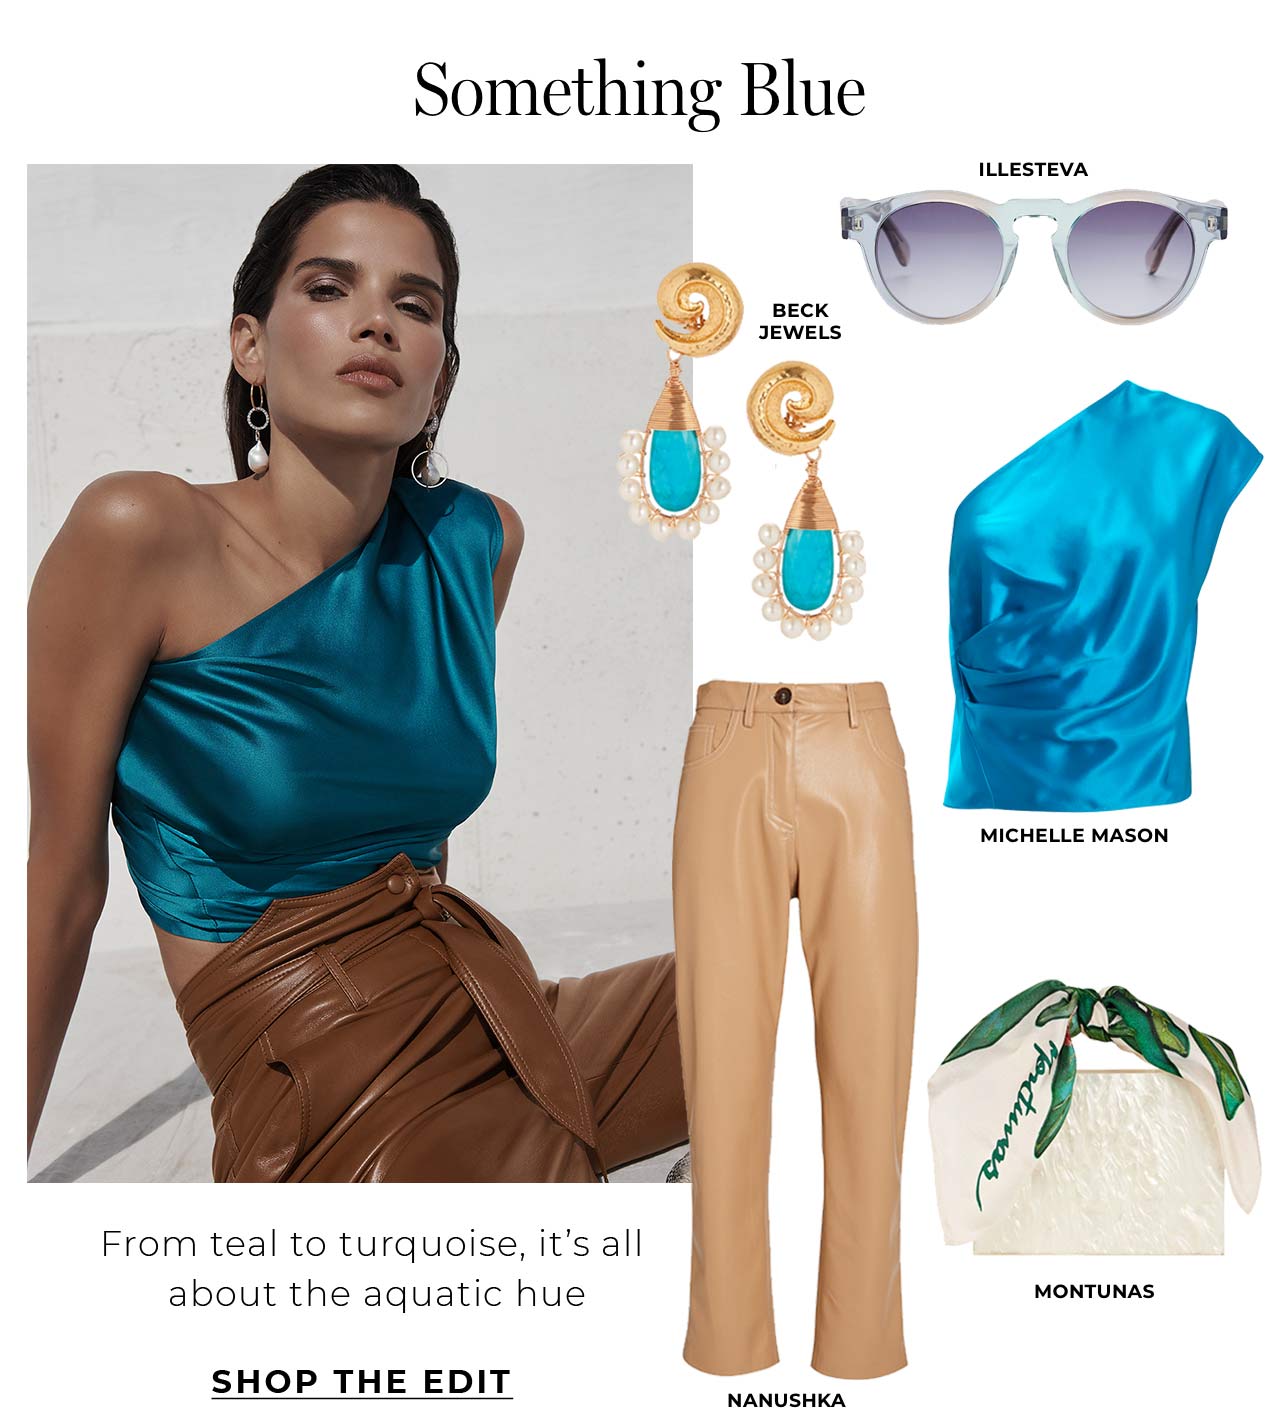 From teal to turquoise, it's all about something blue